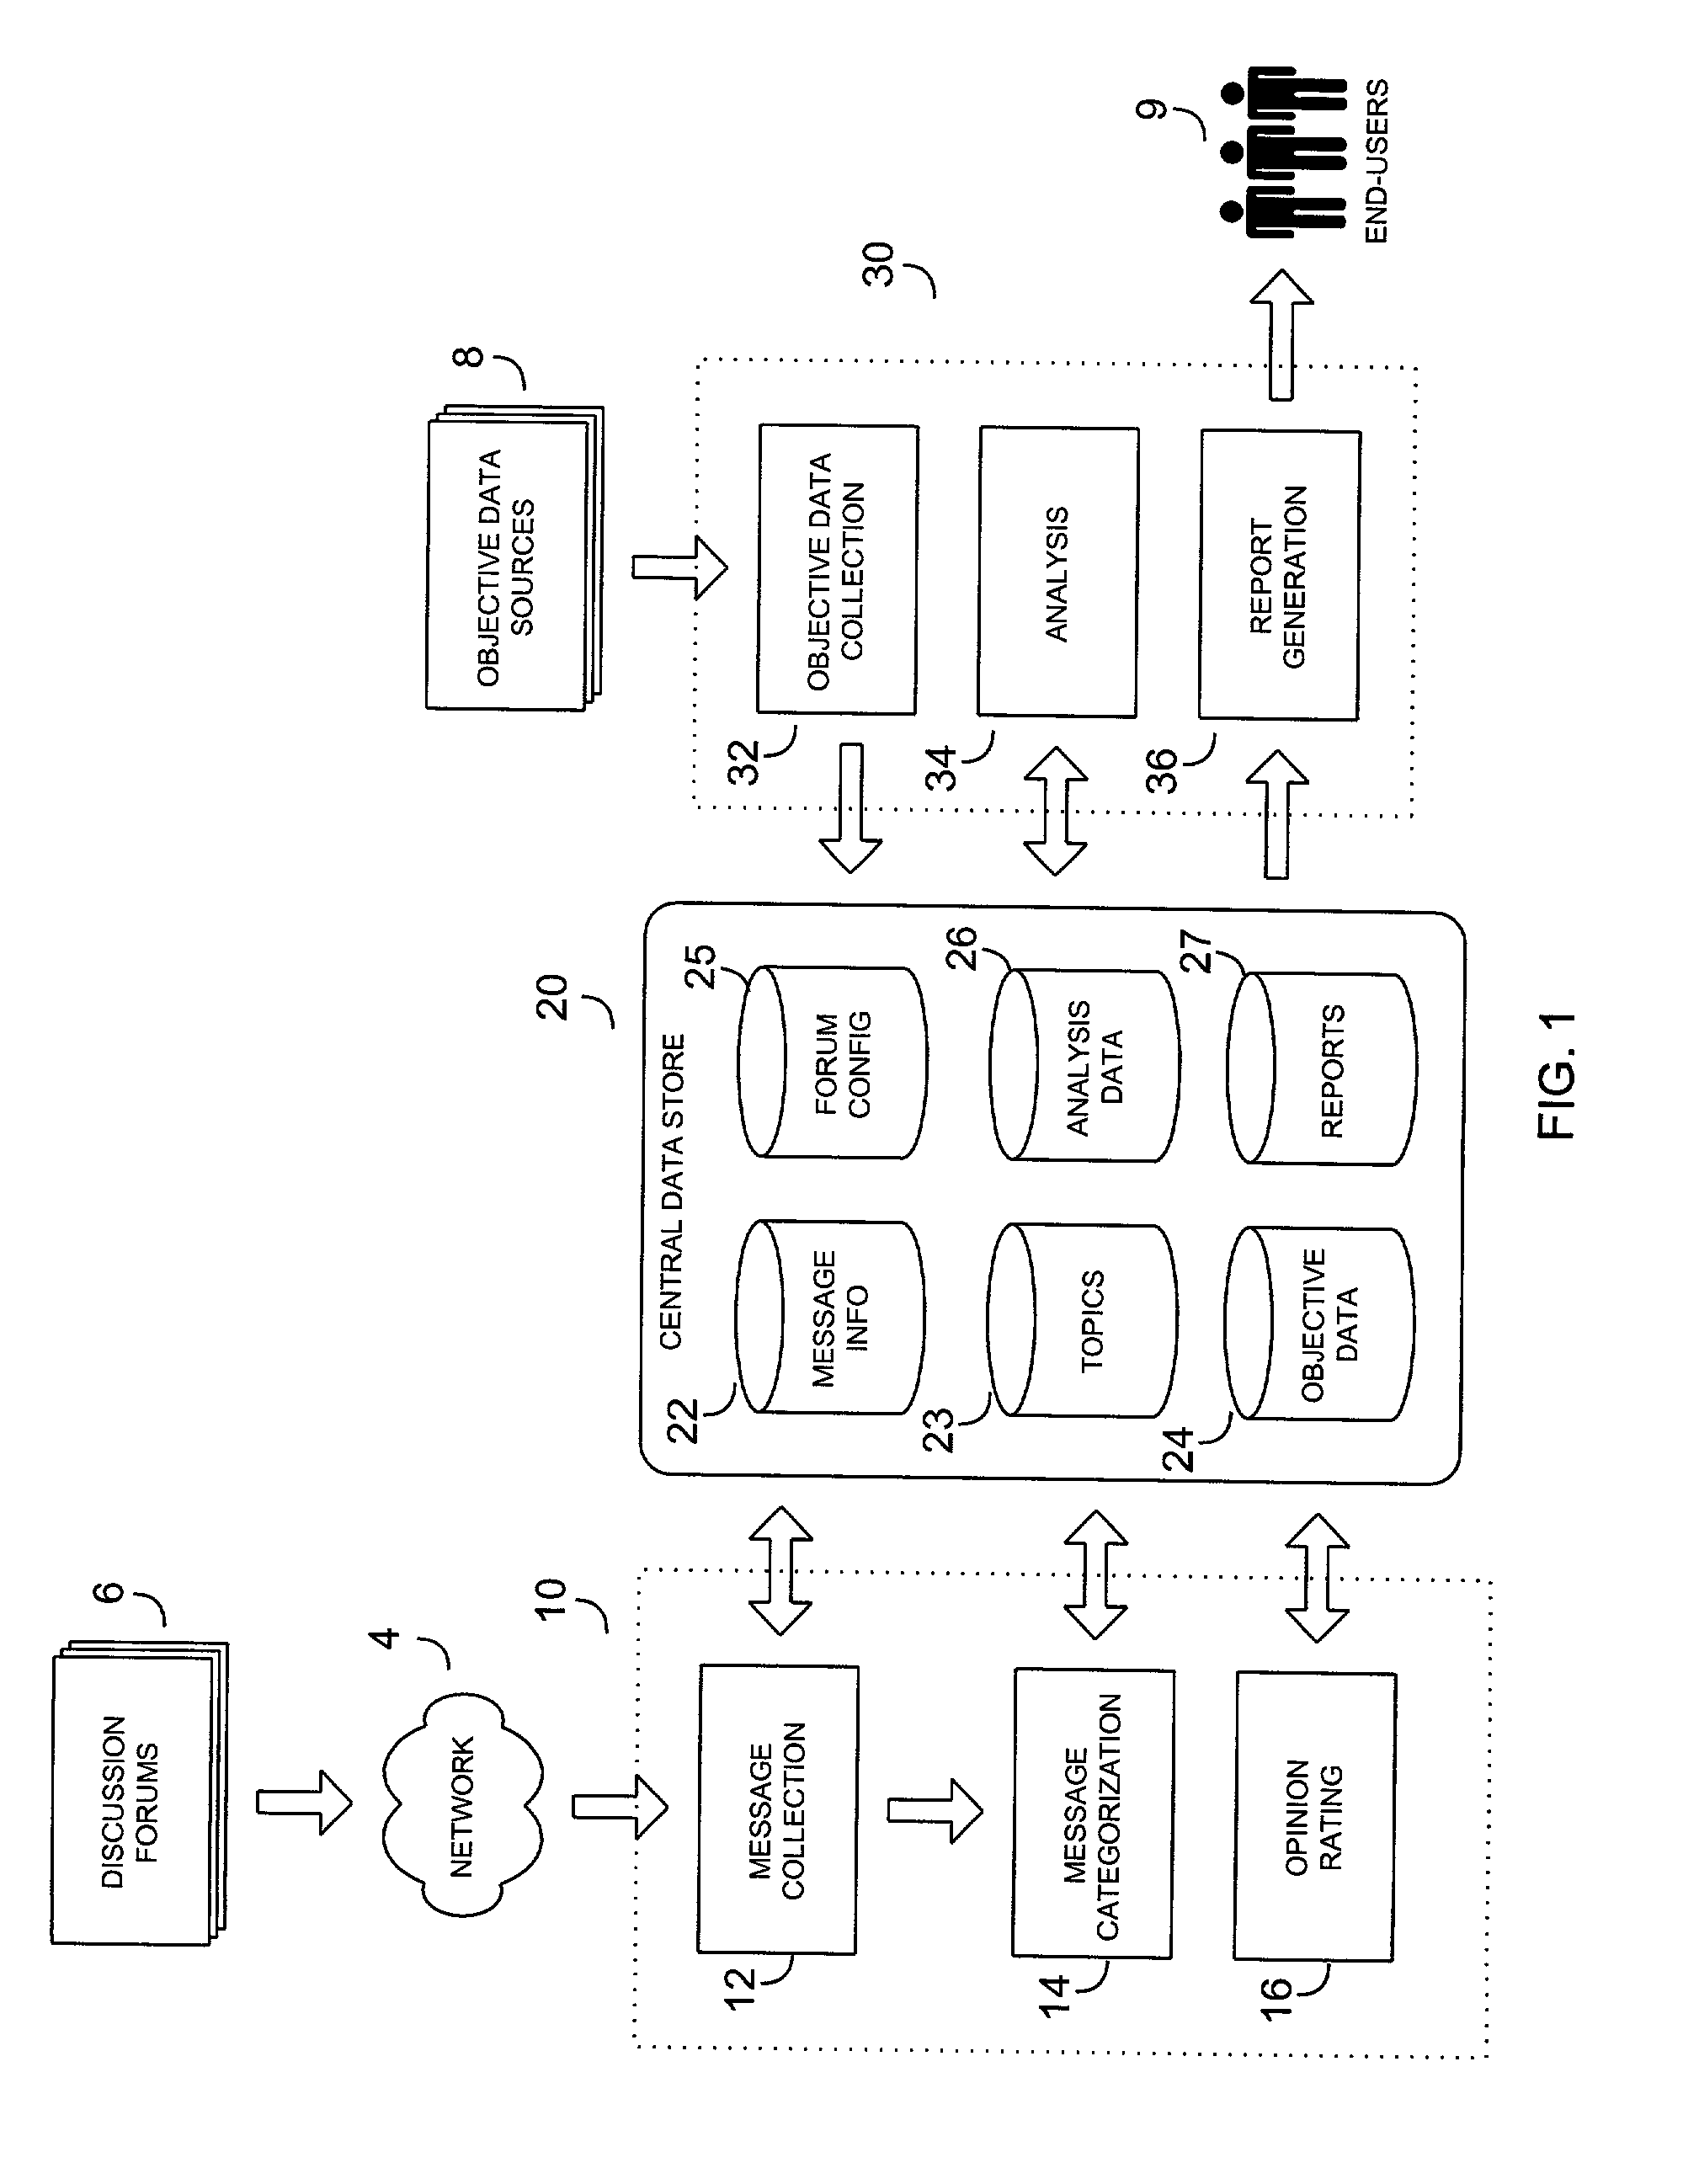 System and method for scoring electronic messages